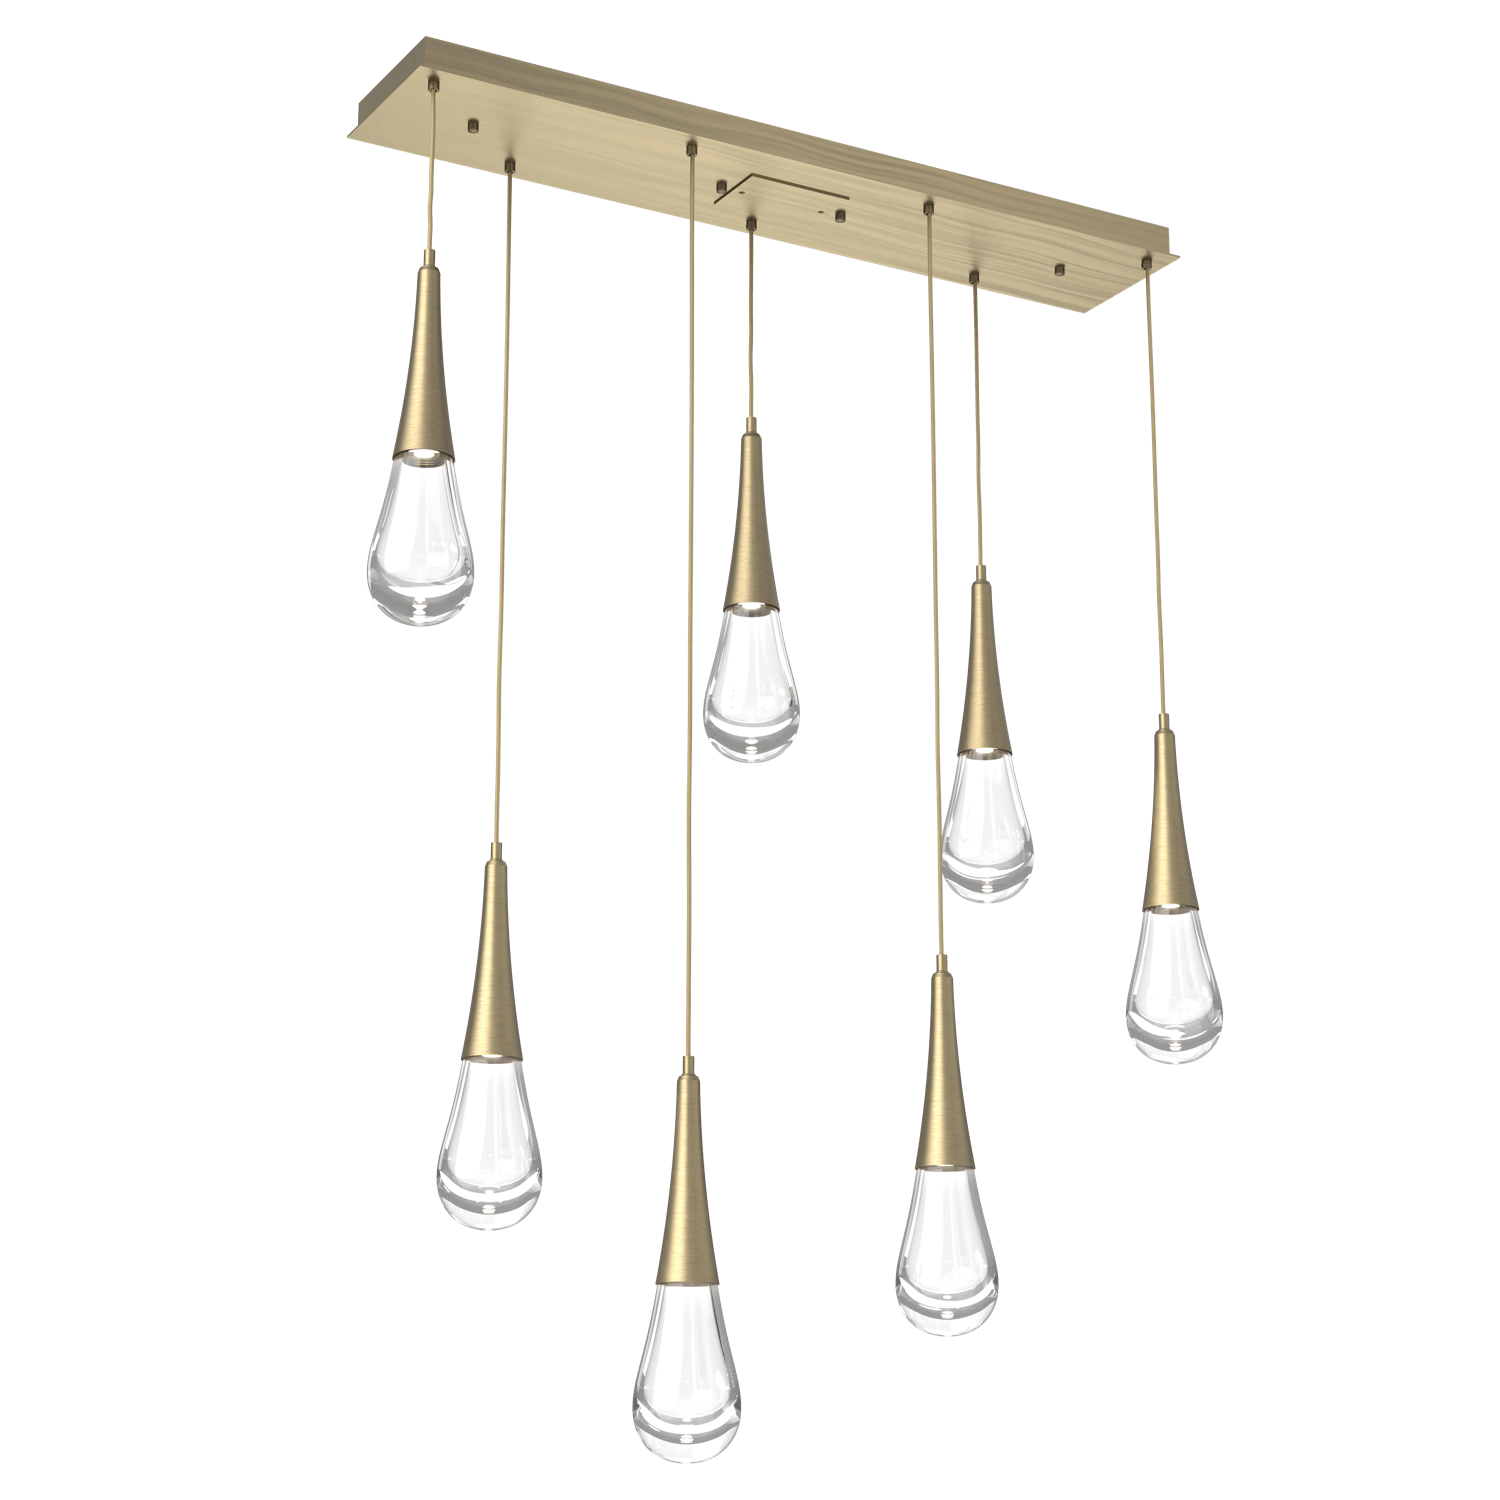 PLB0078-07-HB-Hammerton-Studio-Raindrop-7-light-linear-pendant-chandelier-with-heritage-brass-finish-and-clear-blown-glass-shades-and-LED-lamping